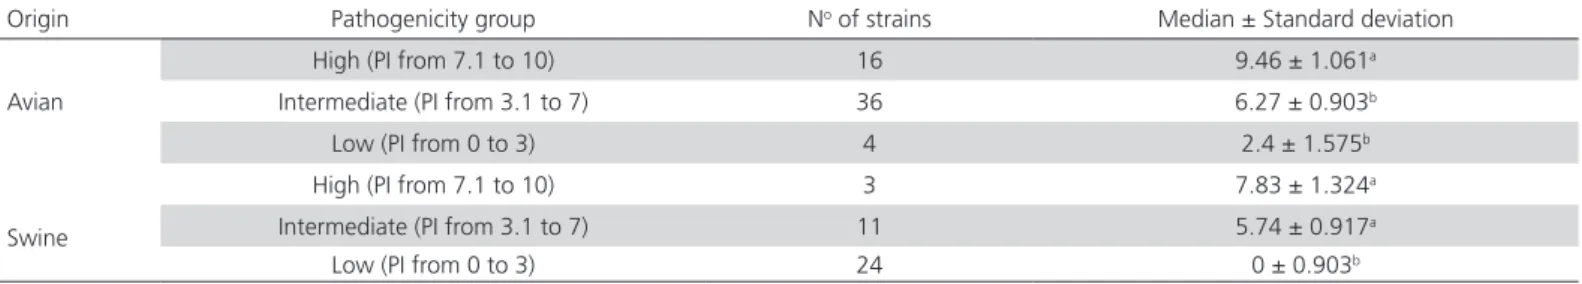 Table 3 – Median values of Pathogenicity Index (PI) obtained according to the distribution of avian and swine strains of P